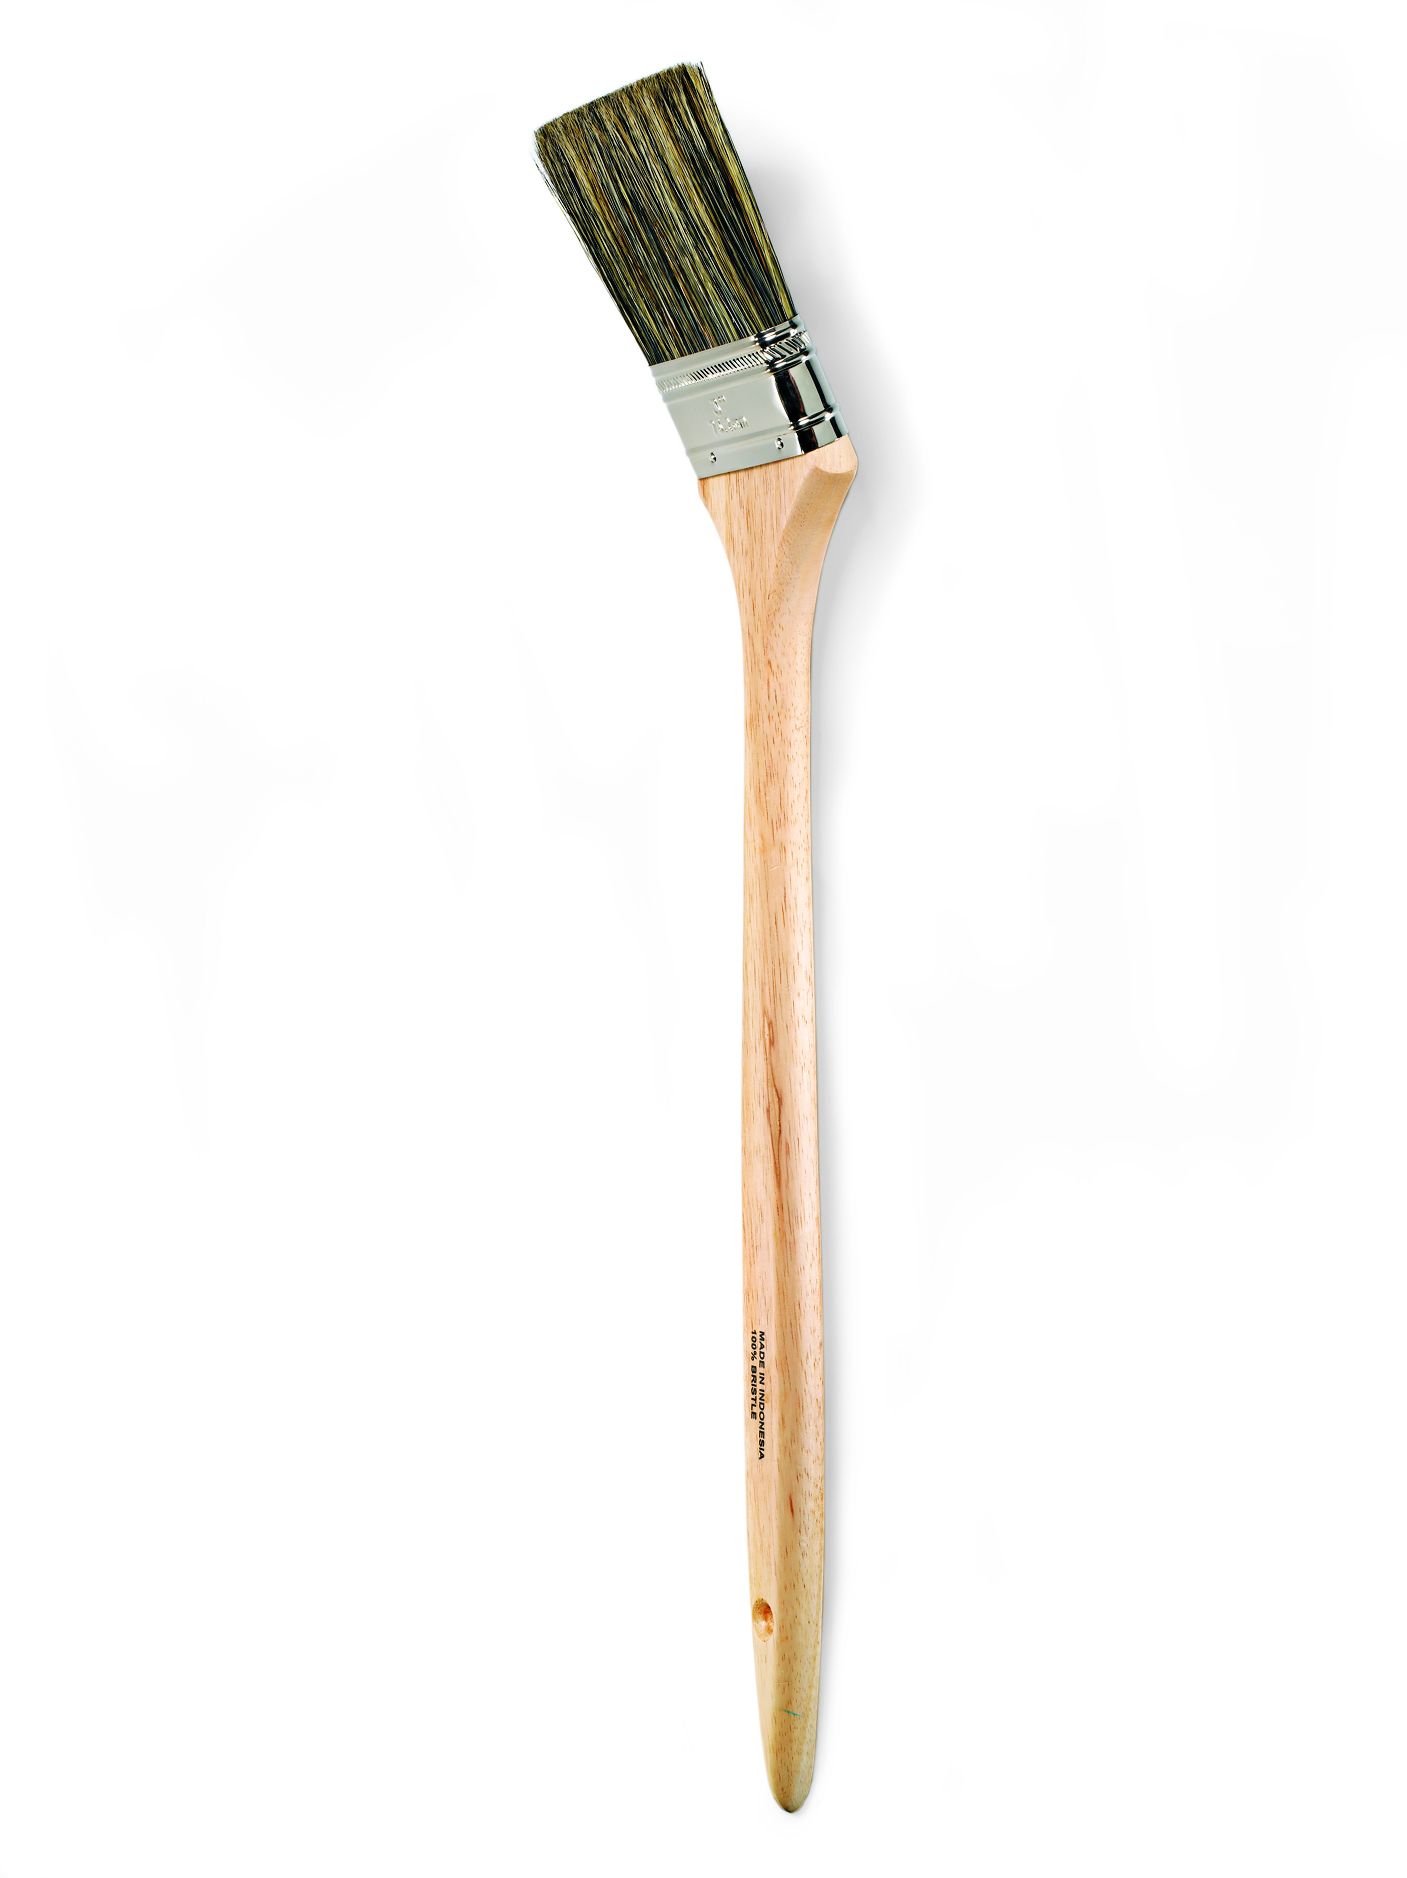 Set of 2 2 Inch European Professional Flat Paint Brushes - Natural Bristle  Woode